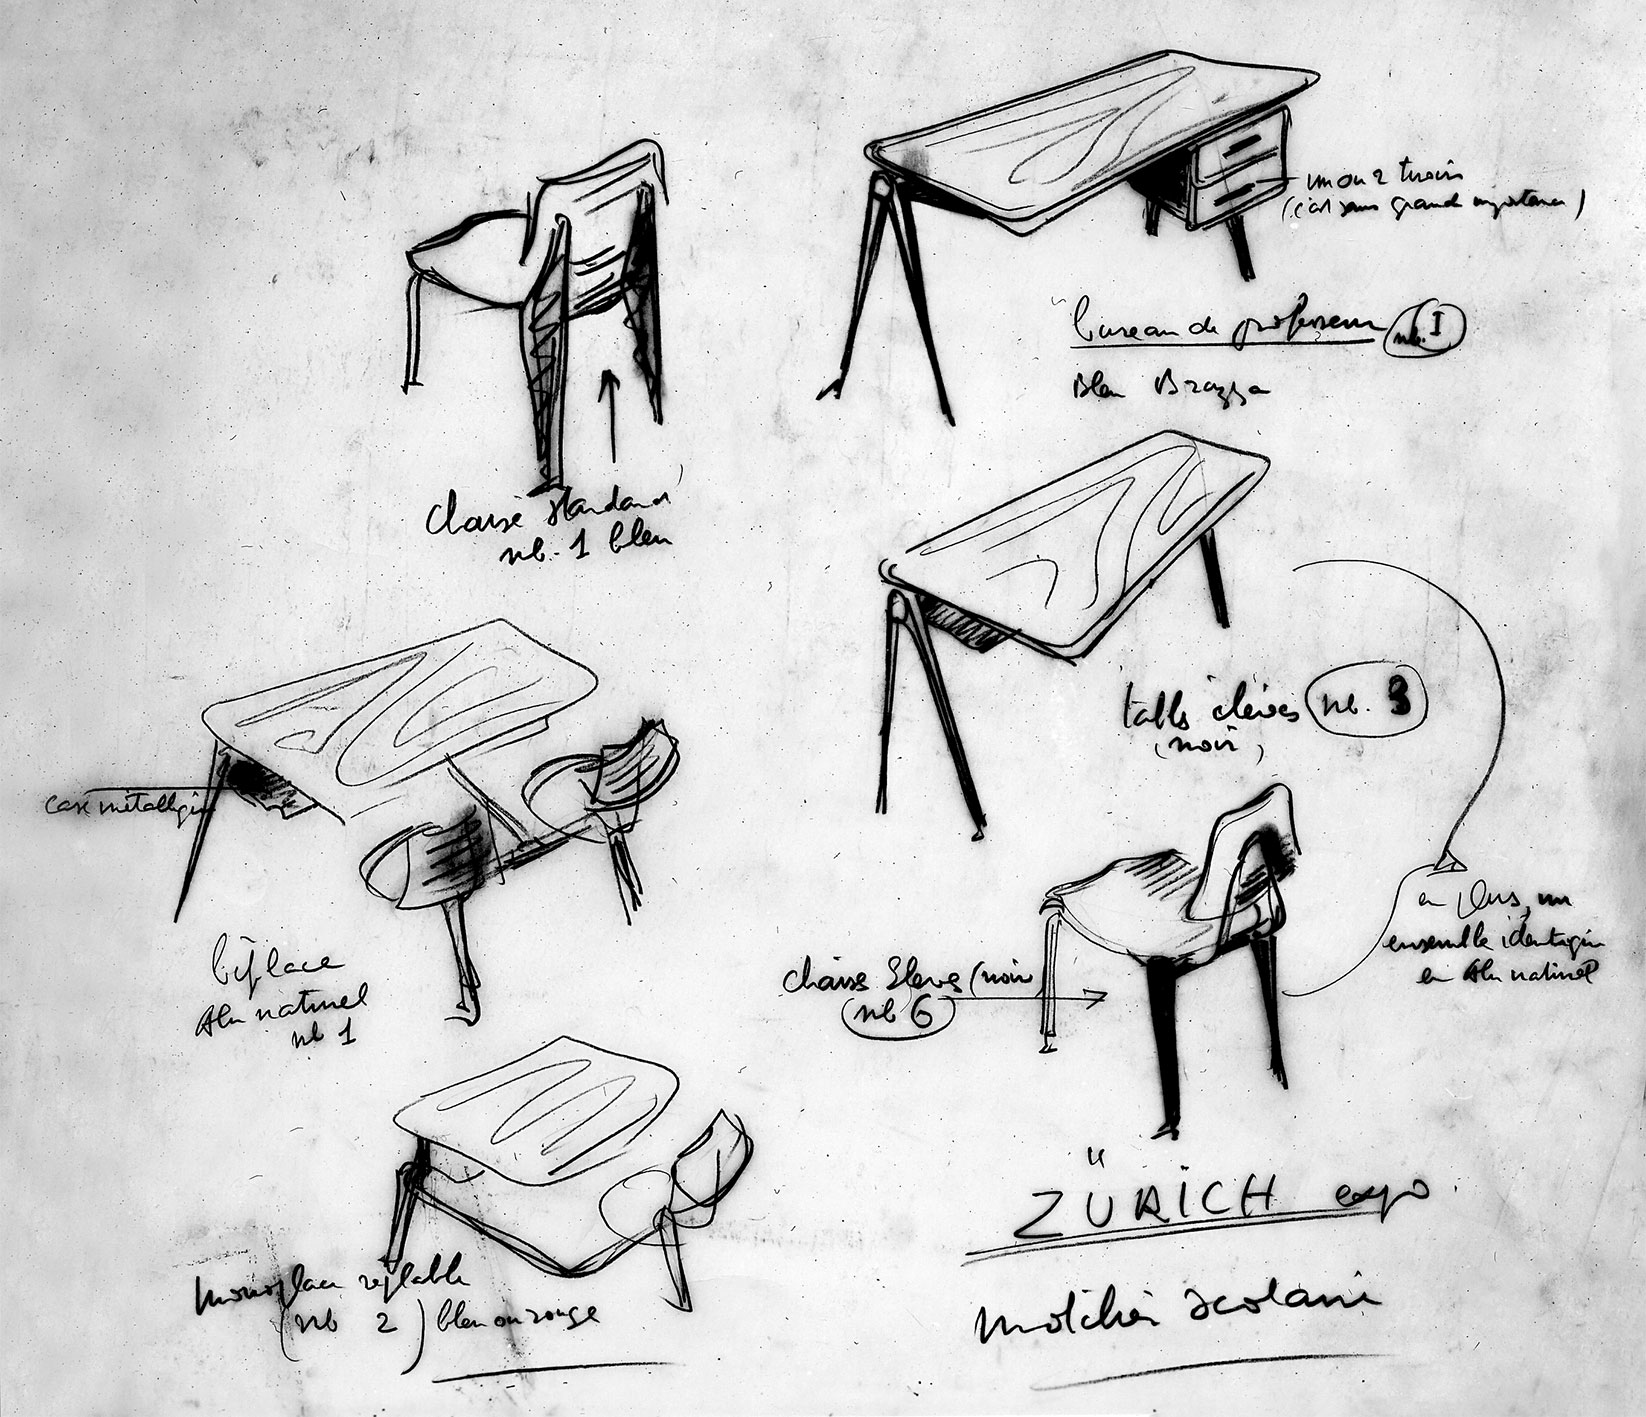 “Zürich exhibition, school furniture”. Nomenclature of the models presented at the Exposition Internationale des Constructions Scolaires (International exhibition of school construction), Zürich, June 1953. Sketch by Jean Prouvé.